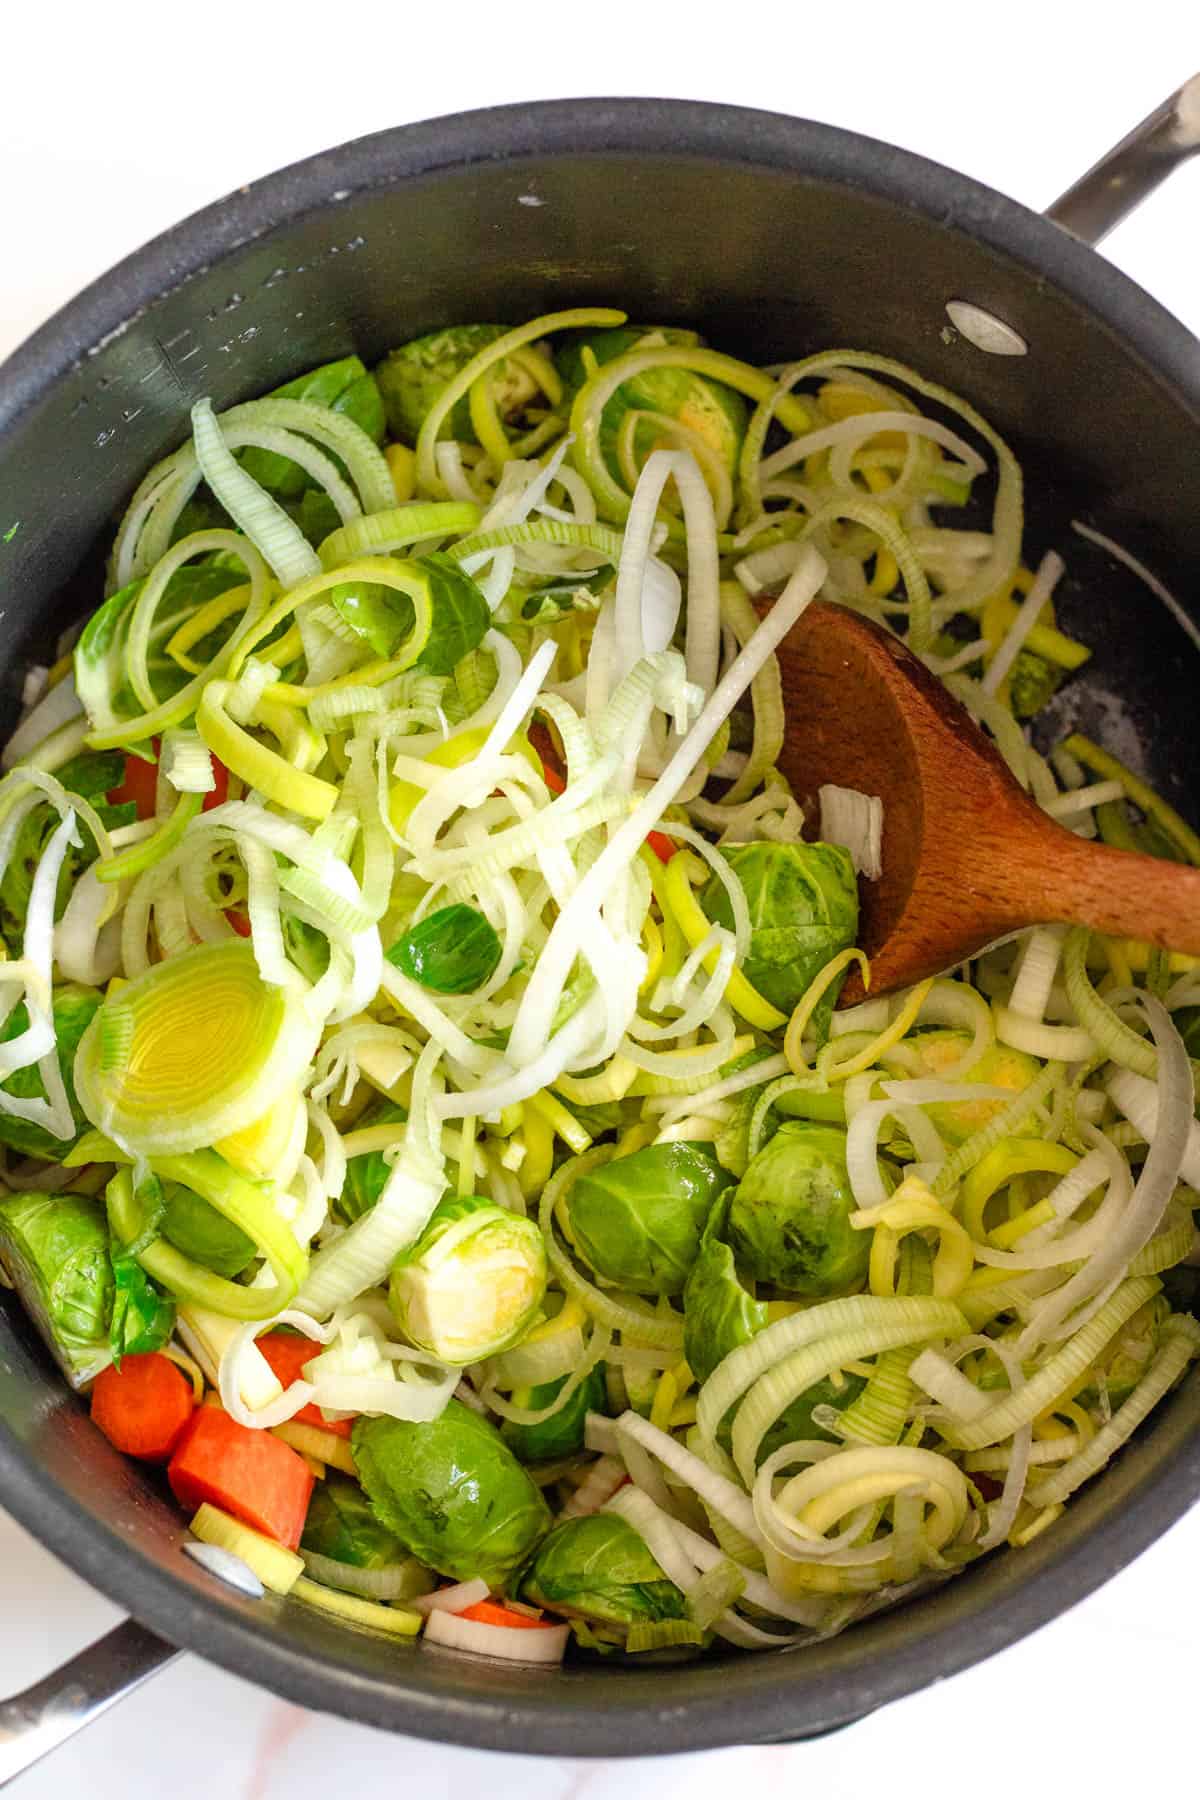 Leeks, Brussels sprouts and carrots sliced up and sauteeing in a pan. 